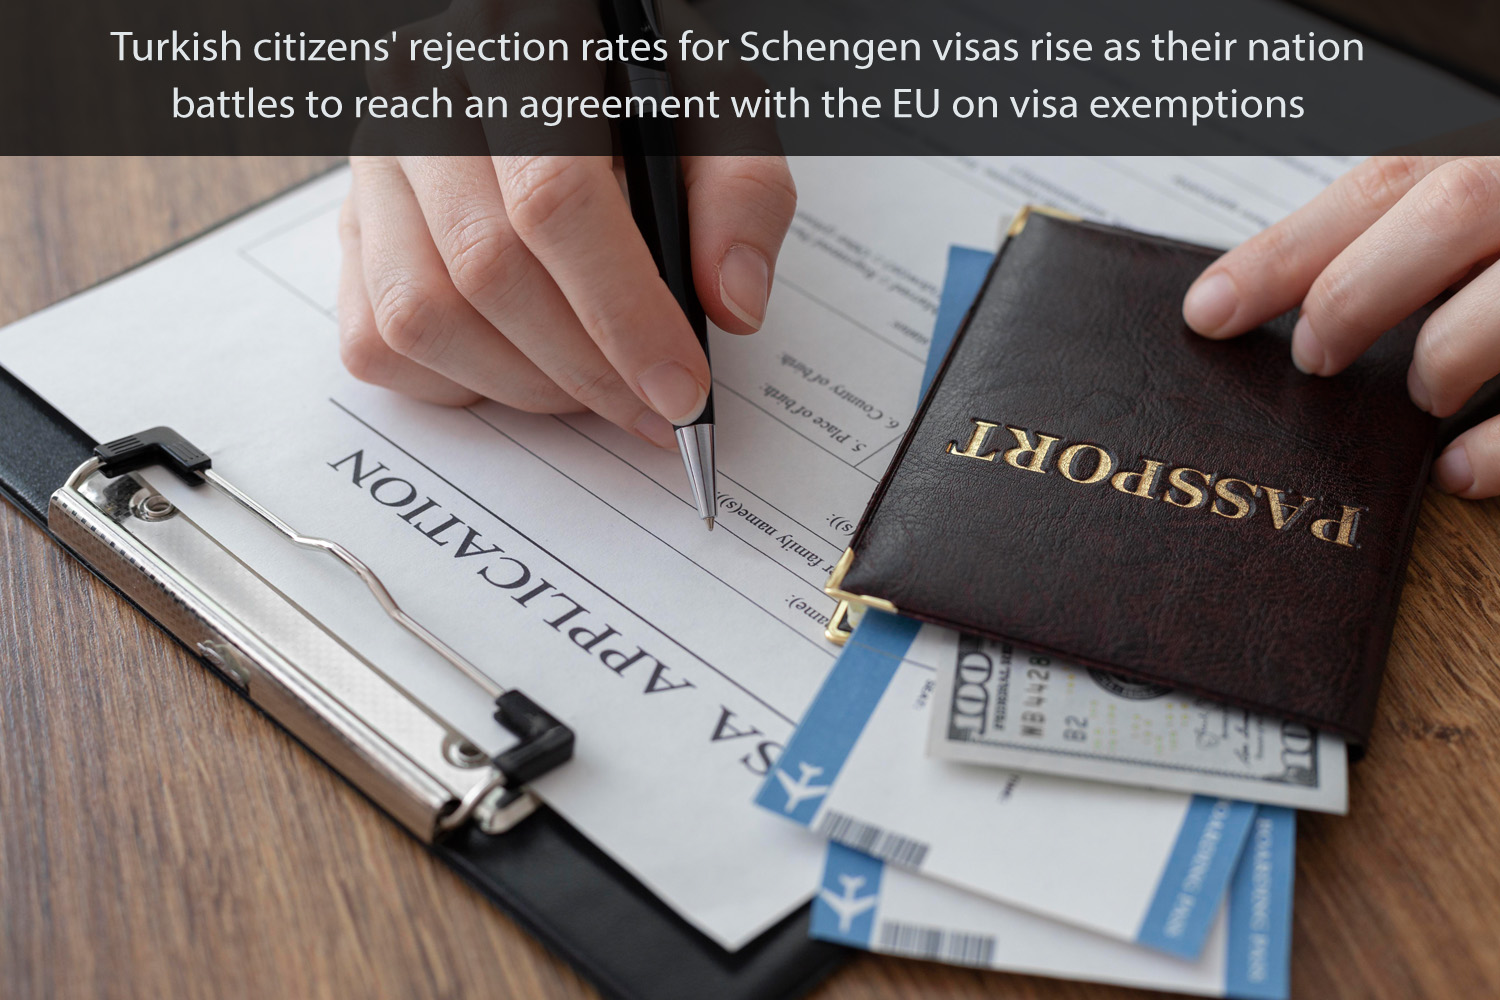 Turkish citizens' rejection rates for Schengen visas rise as their nation battles to reach an agreement with the EU on visa exemptions.